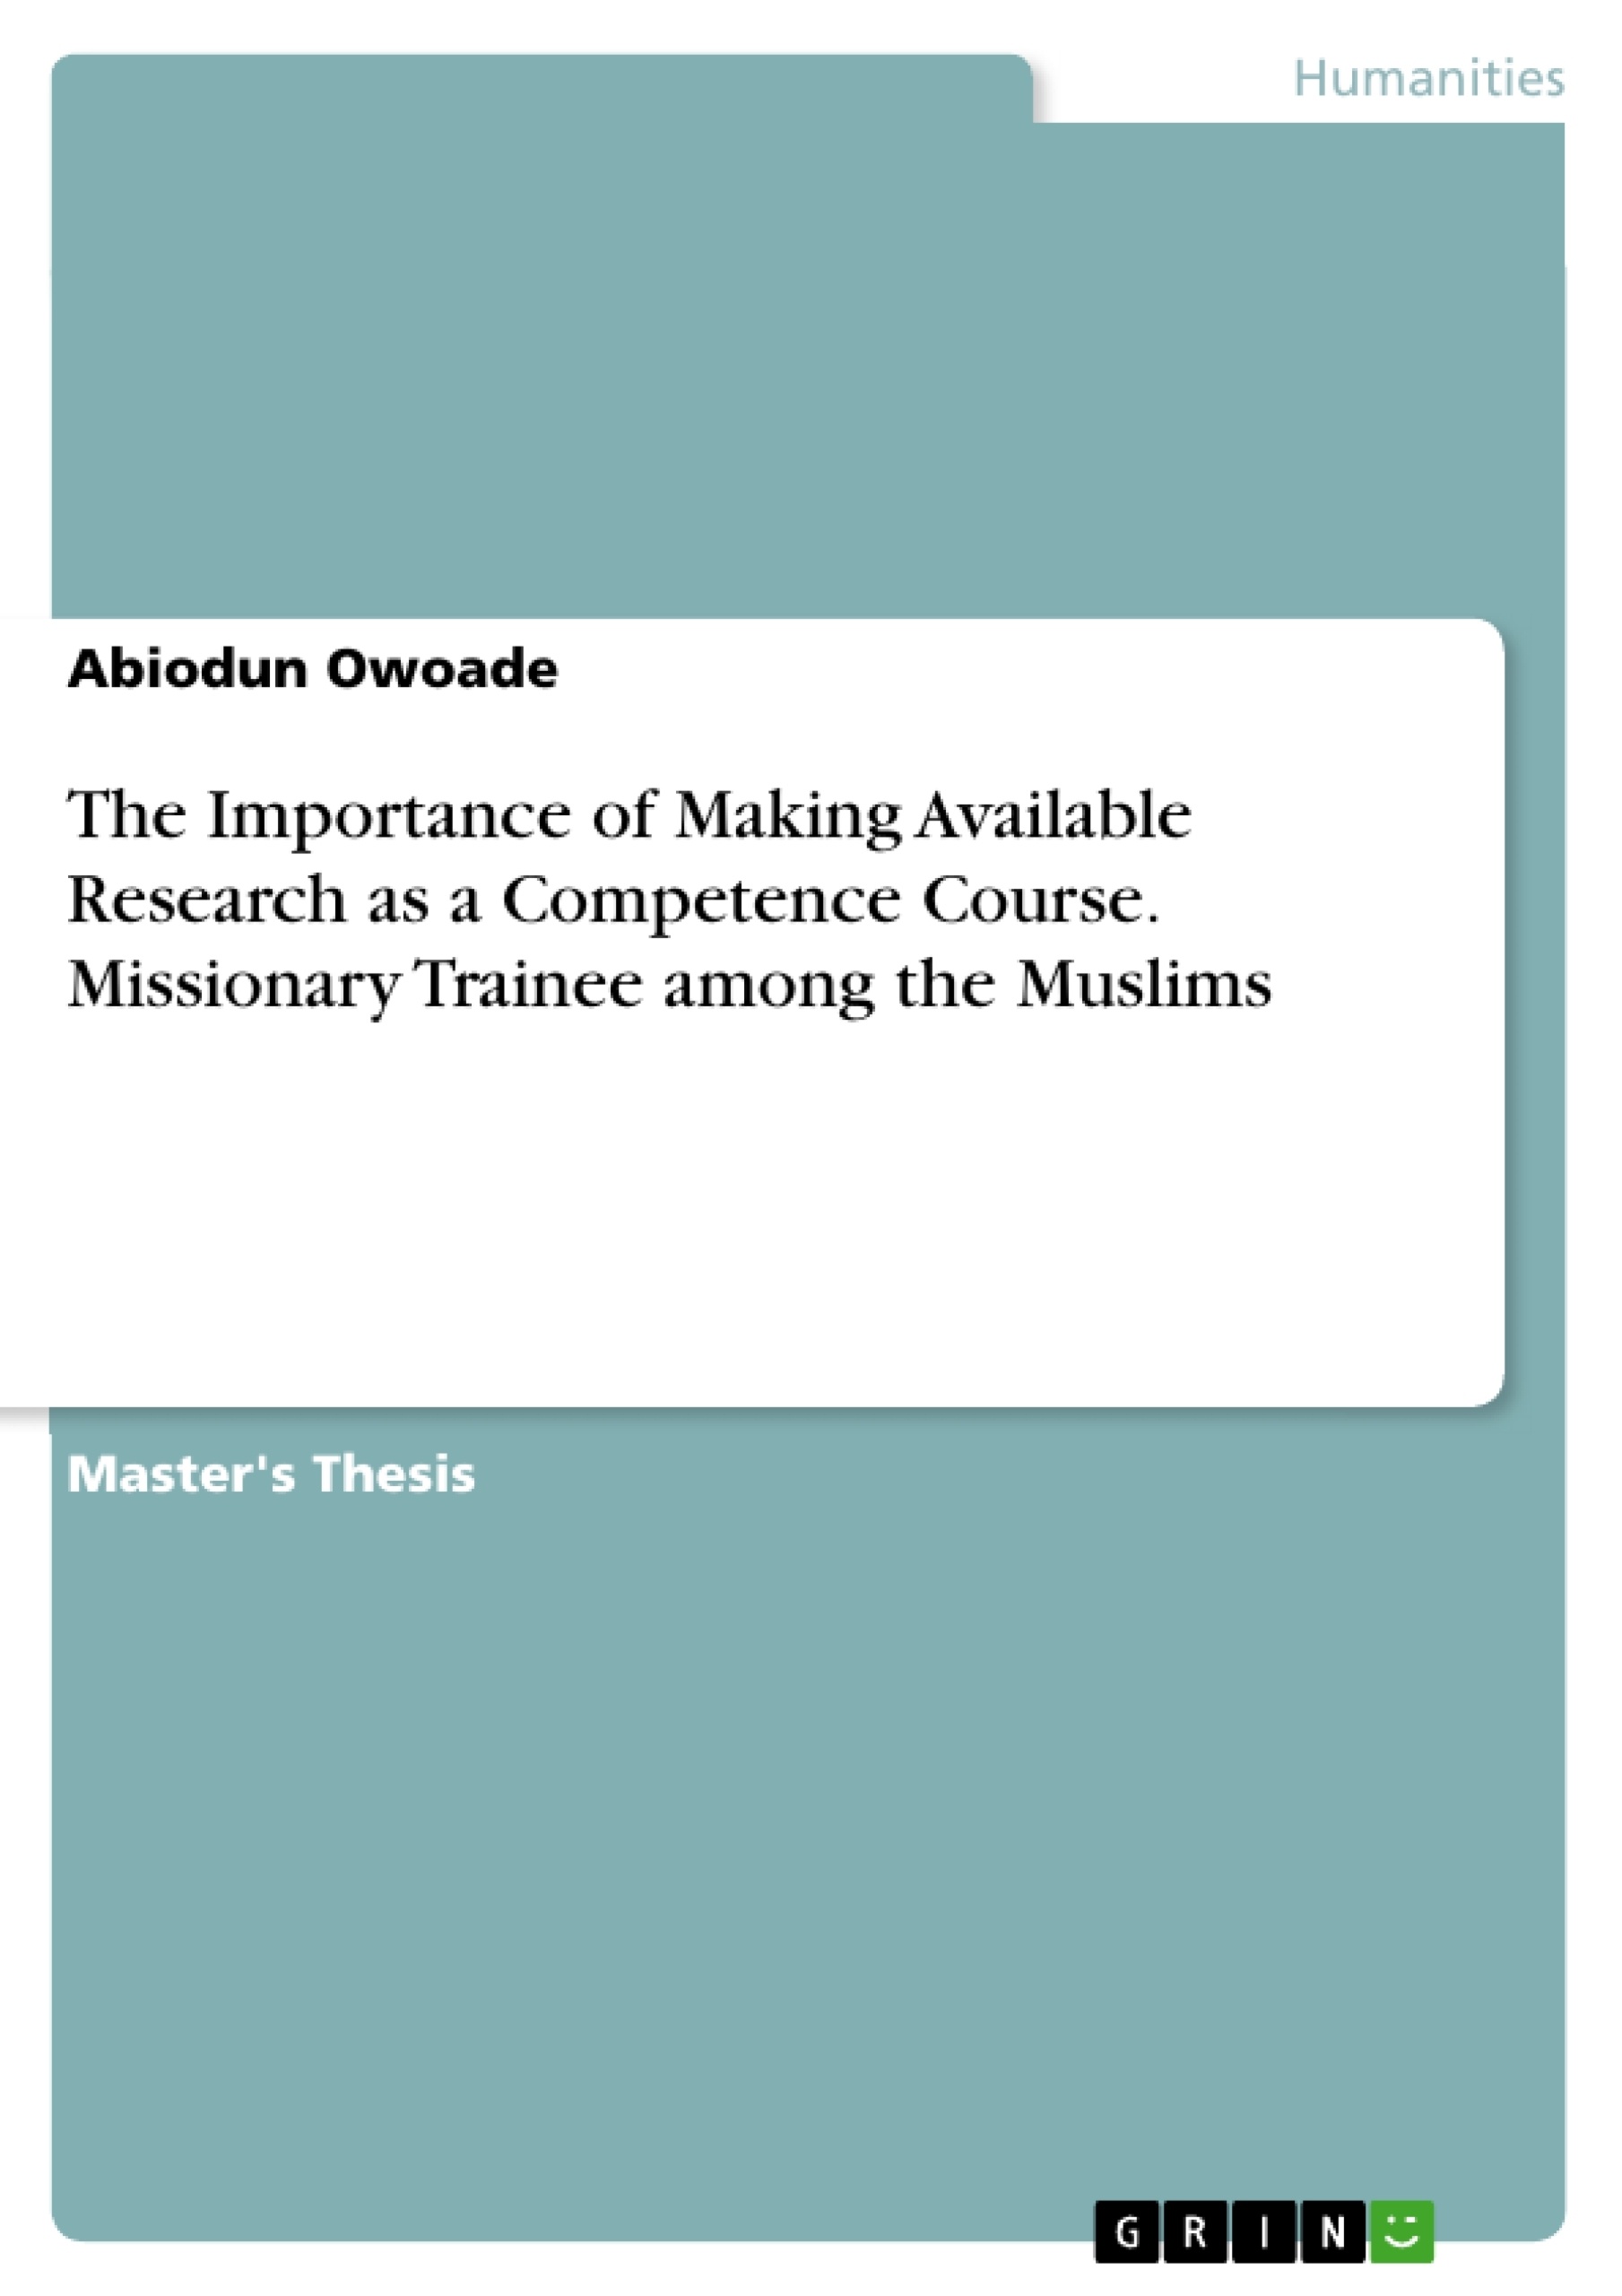 Title: The Importance of Making Available Research as a Competence Course. Missionary Trainee among the Muslims